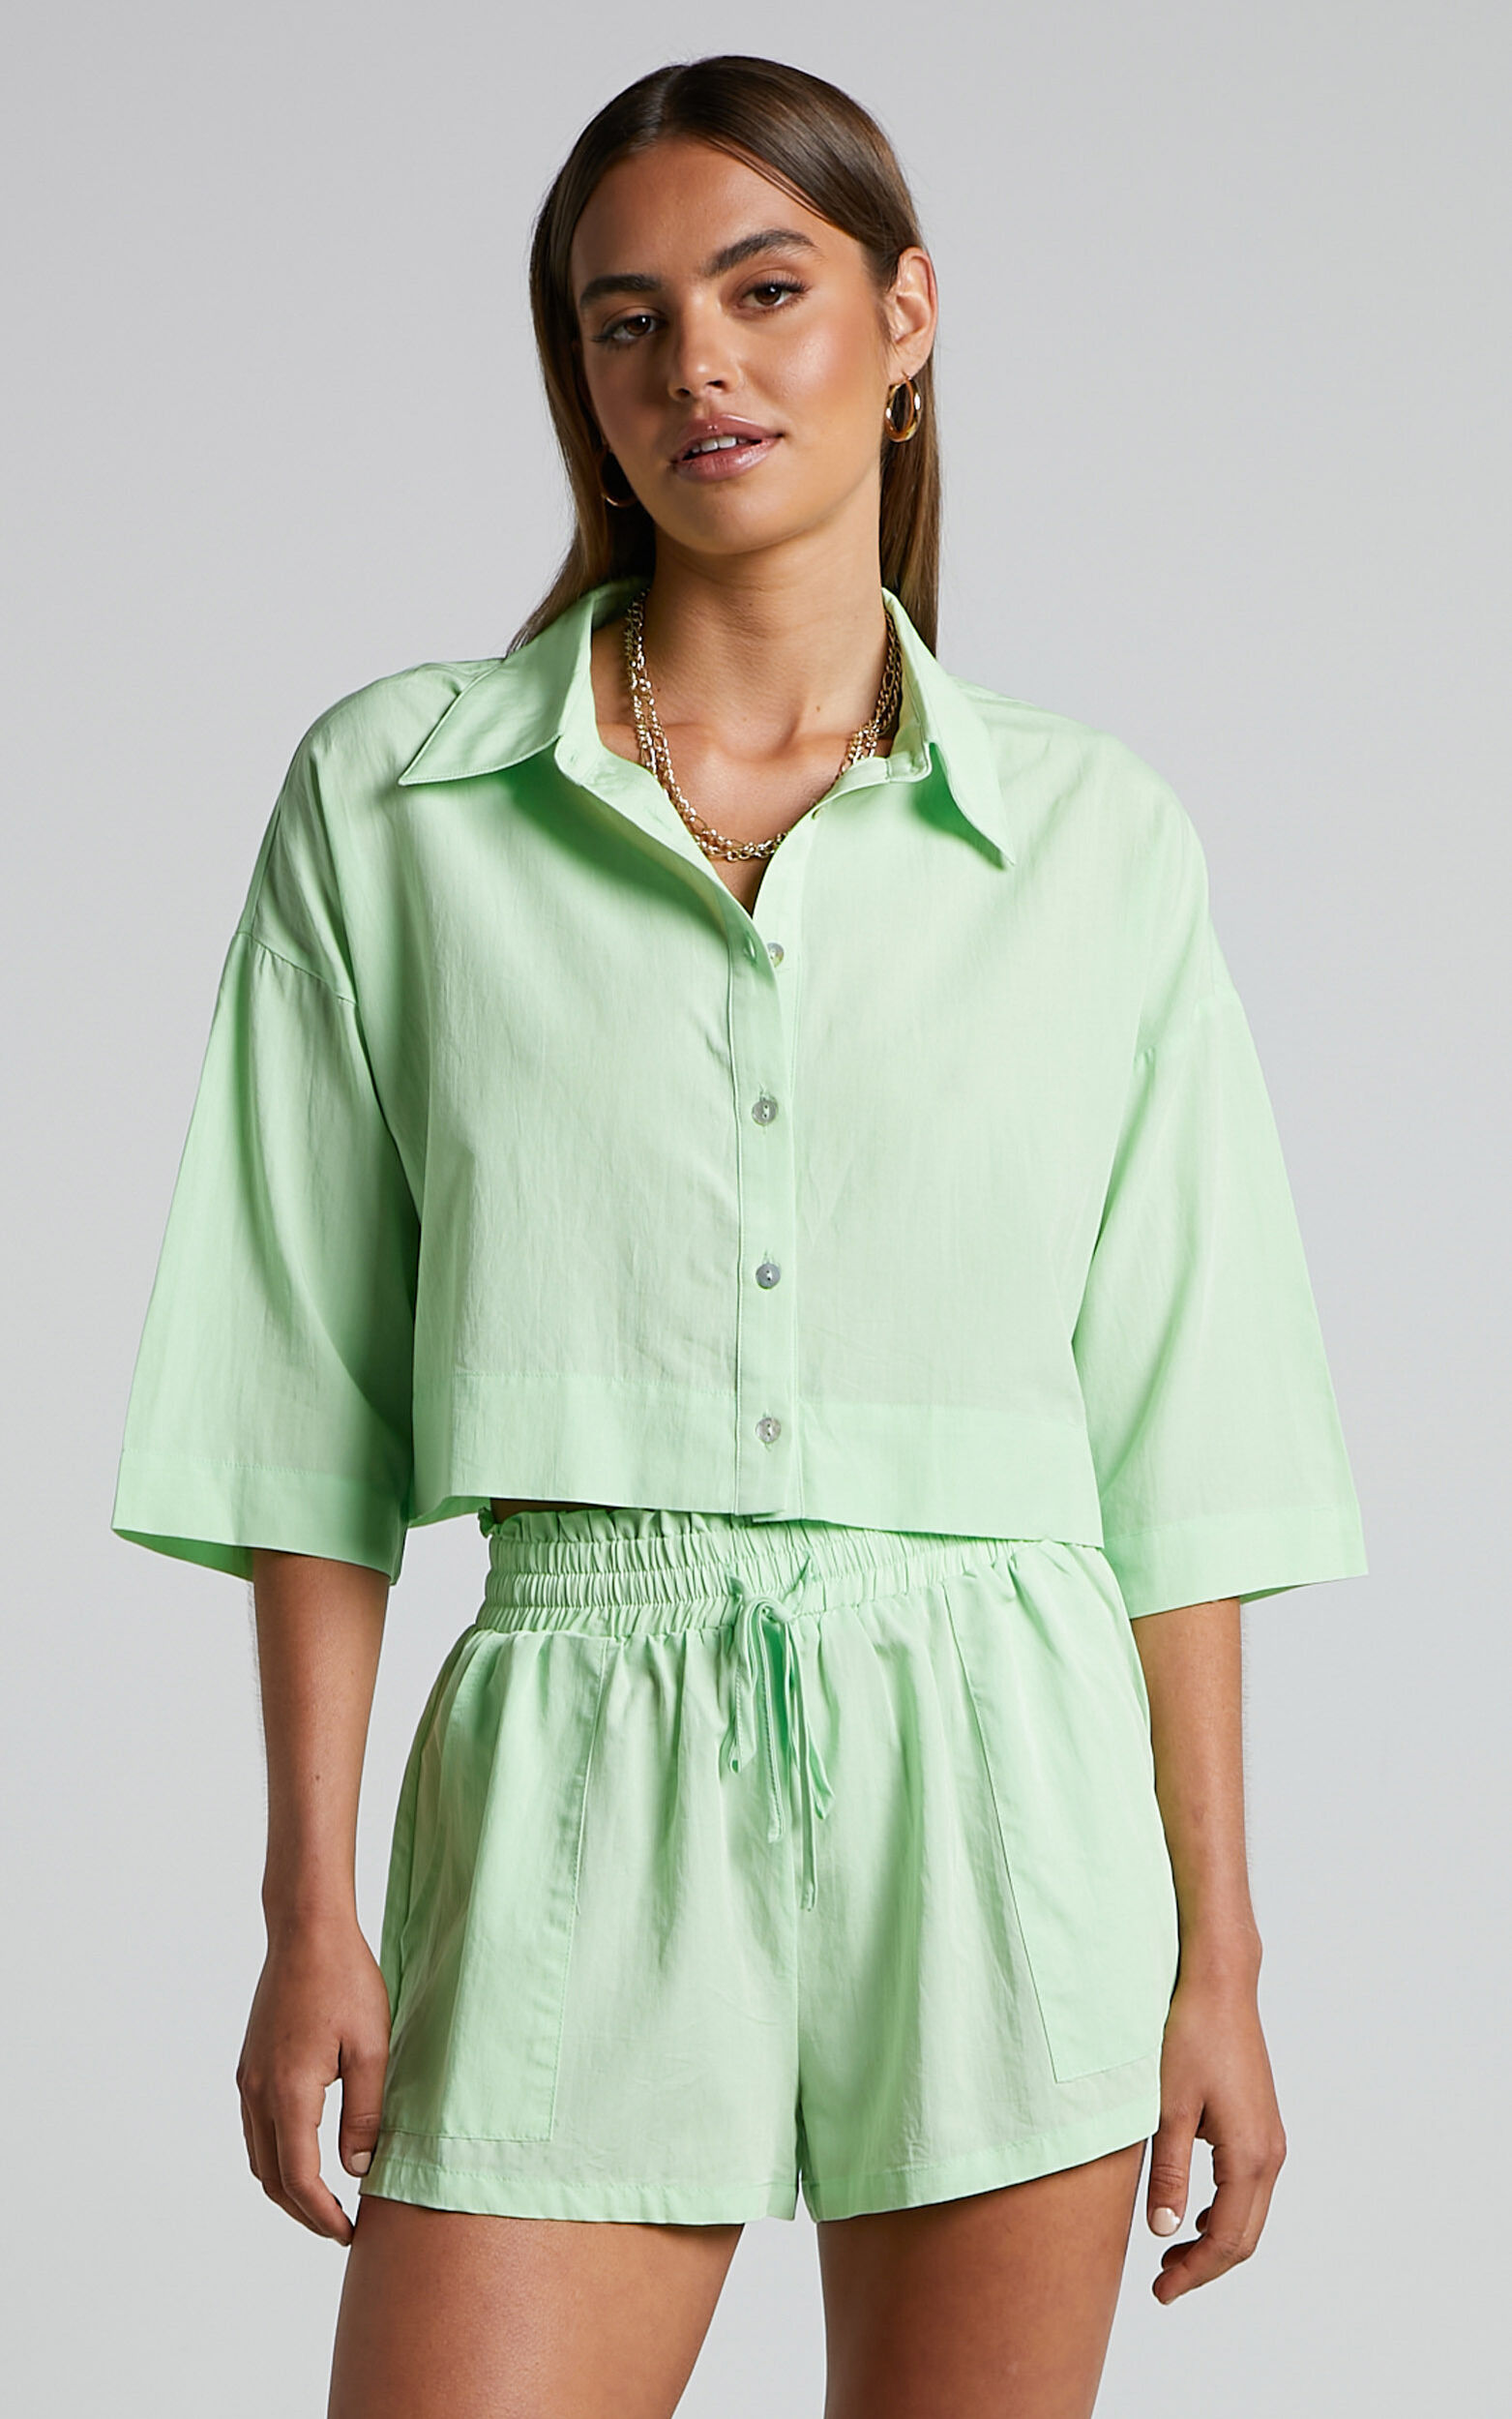 Jesmae Top - Relaxed Boxy Sleeve Cropped Shirt in Mint - 04, GRN1